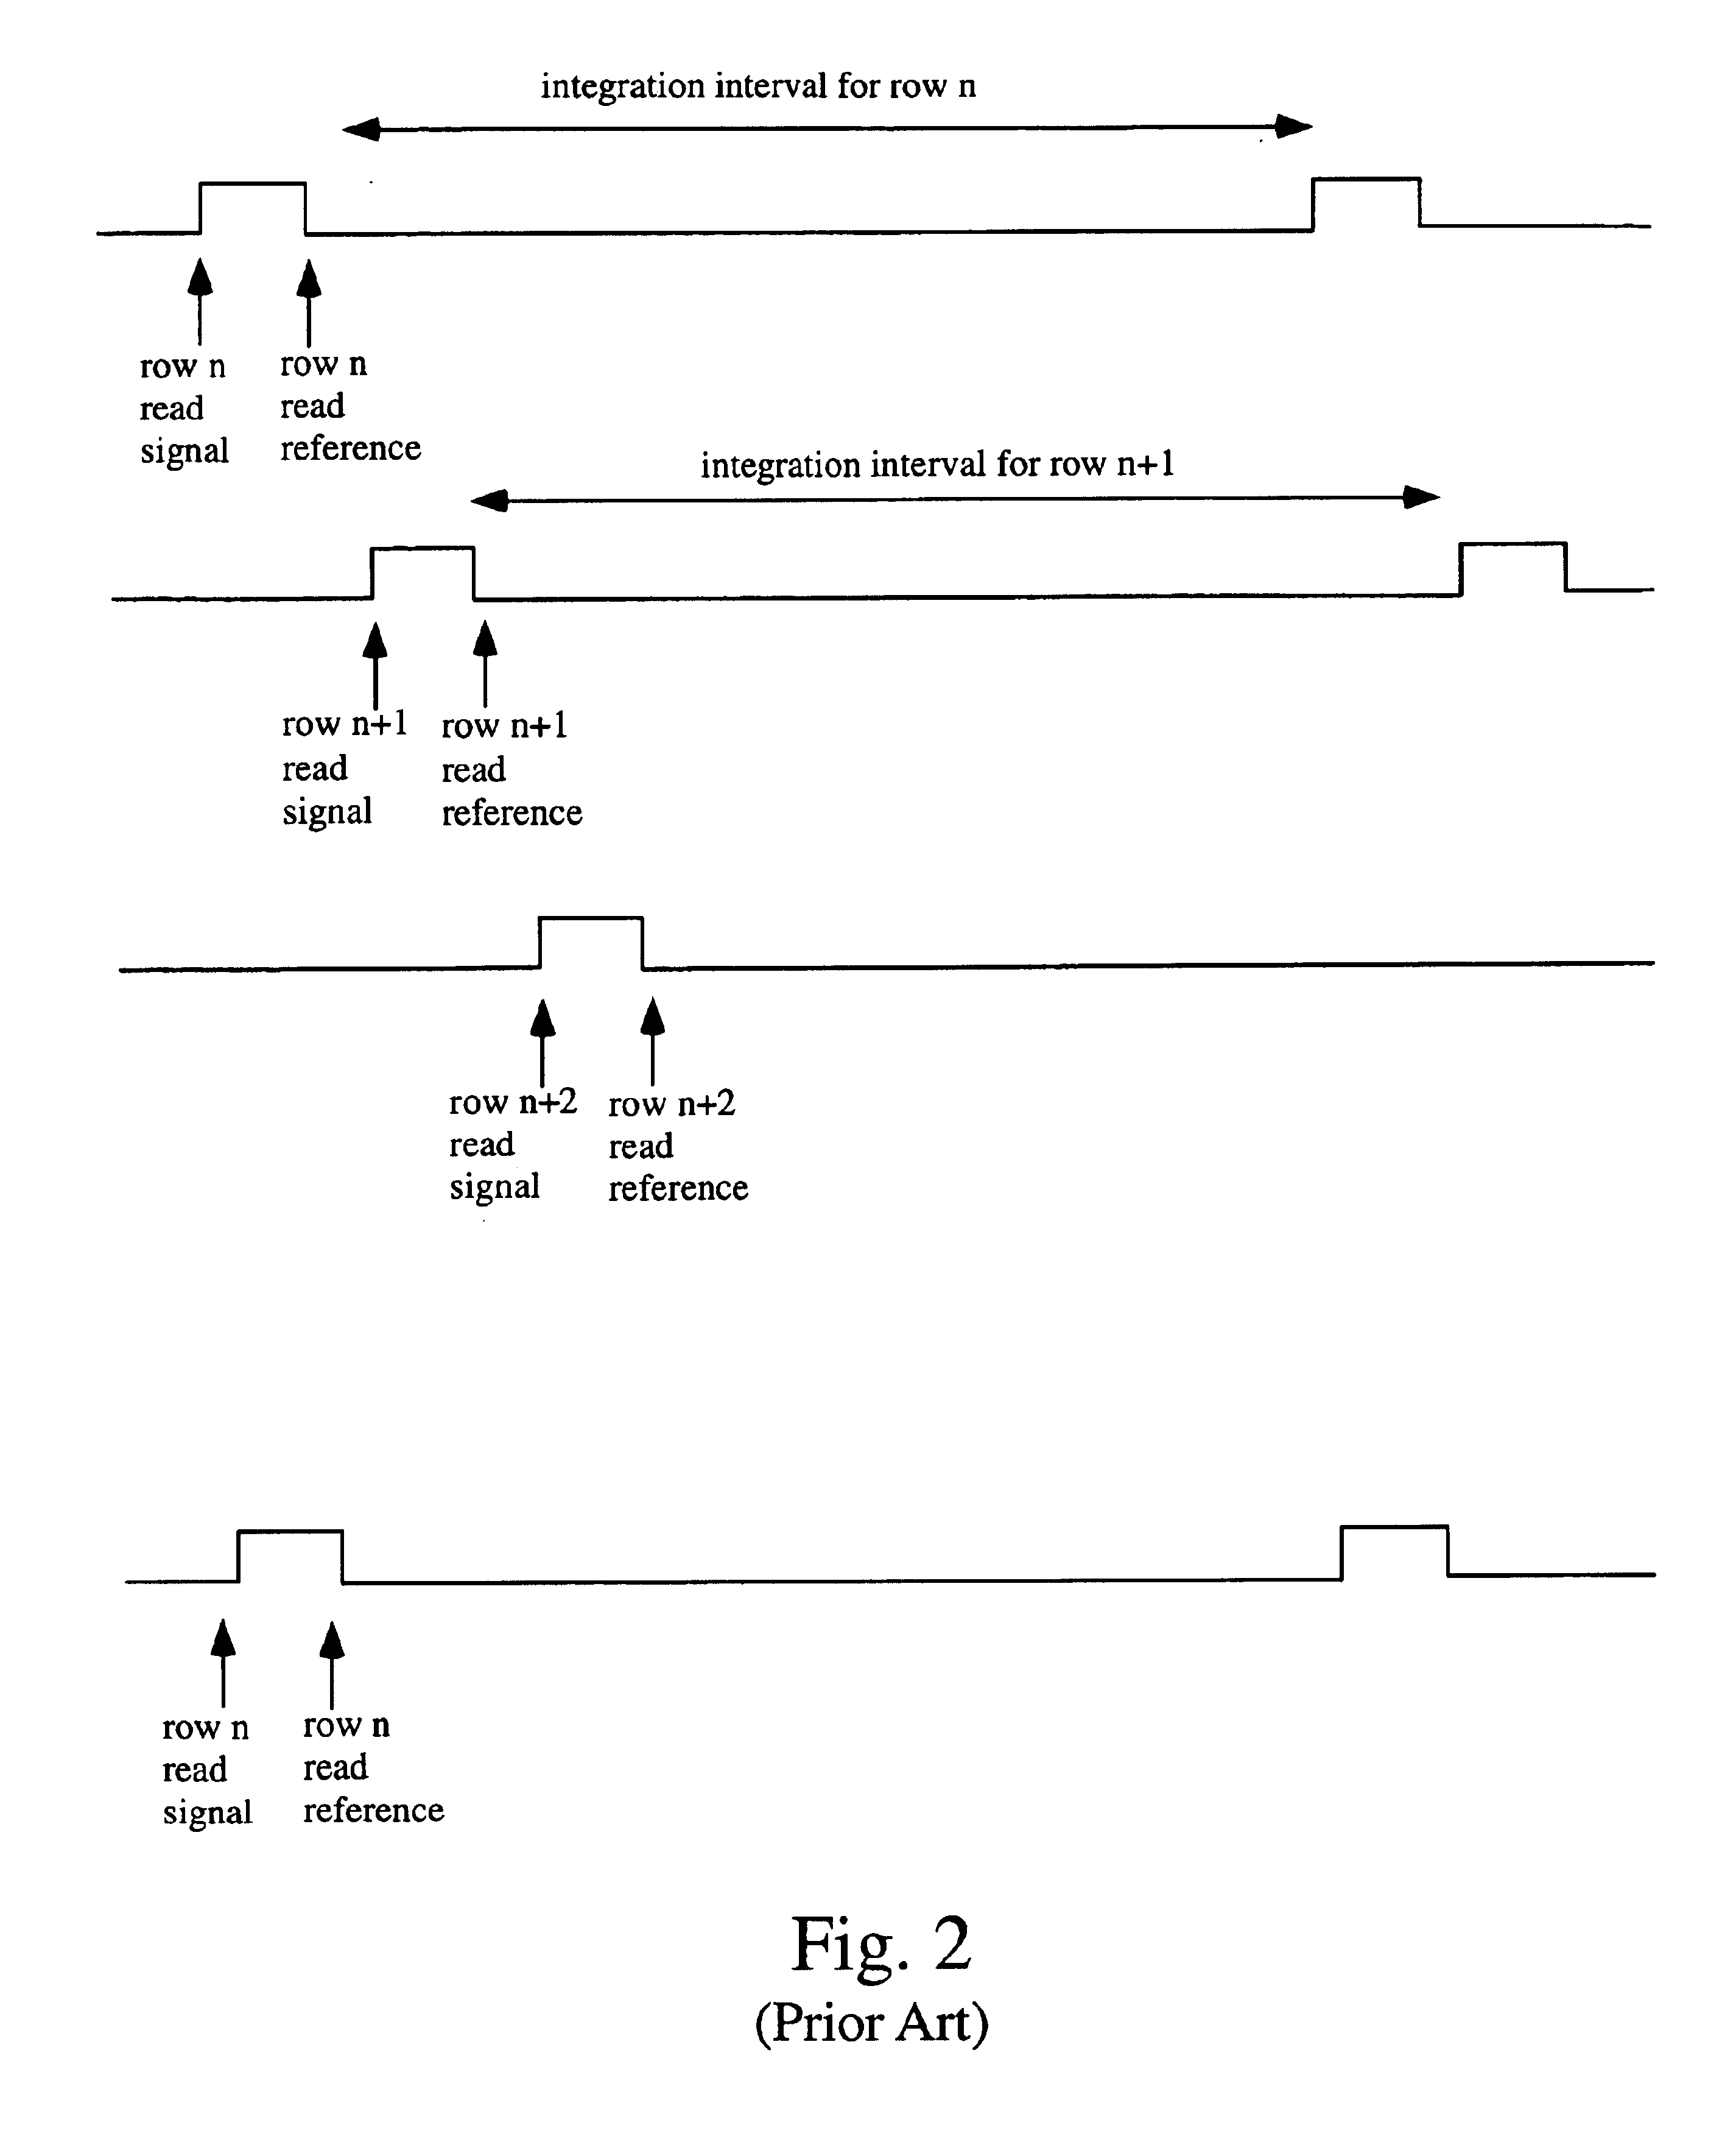 Intra-pixel frame storage element, array, and electronic shutter method suitable for electronic still camera applications